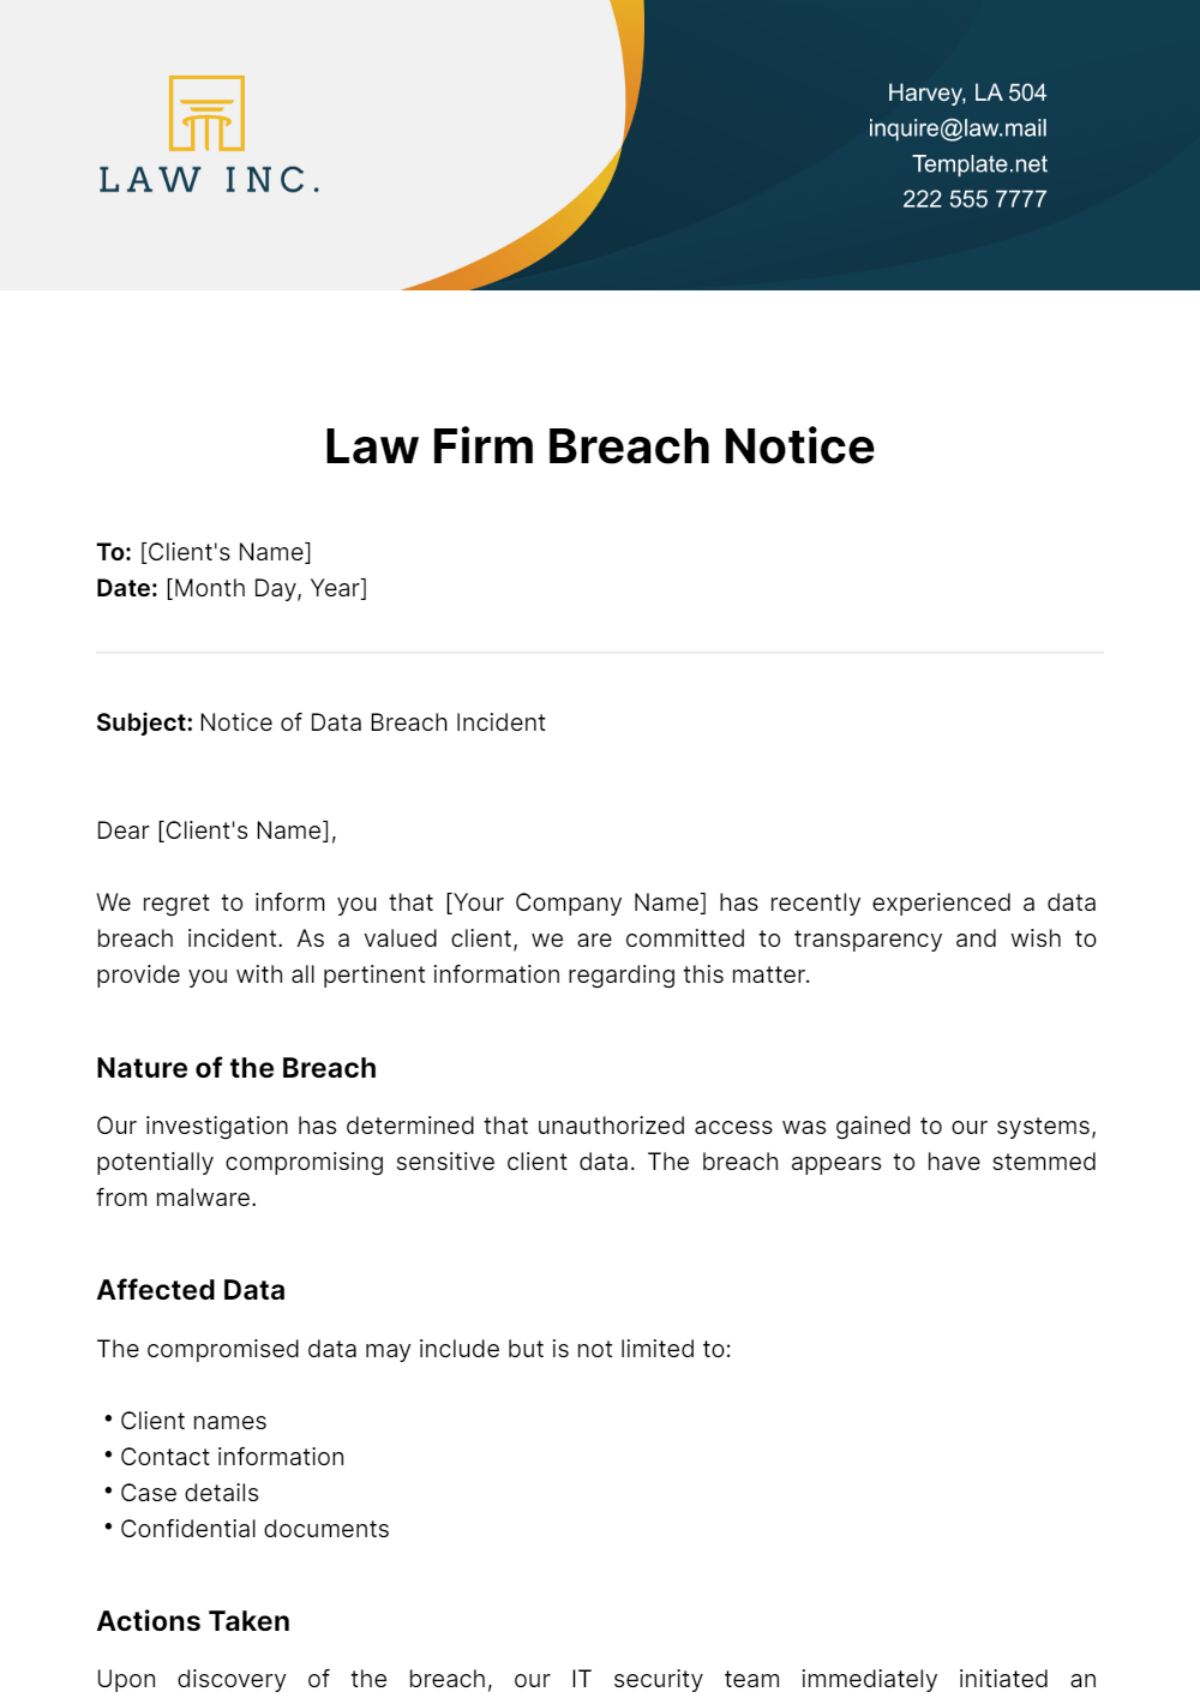 Law Firm Breach Notice Template